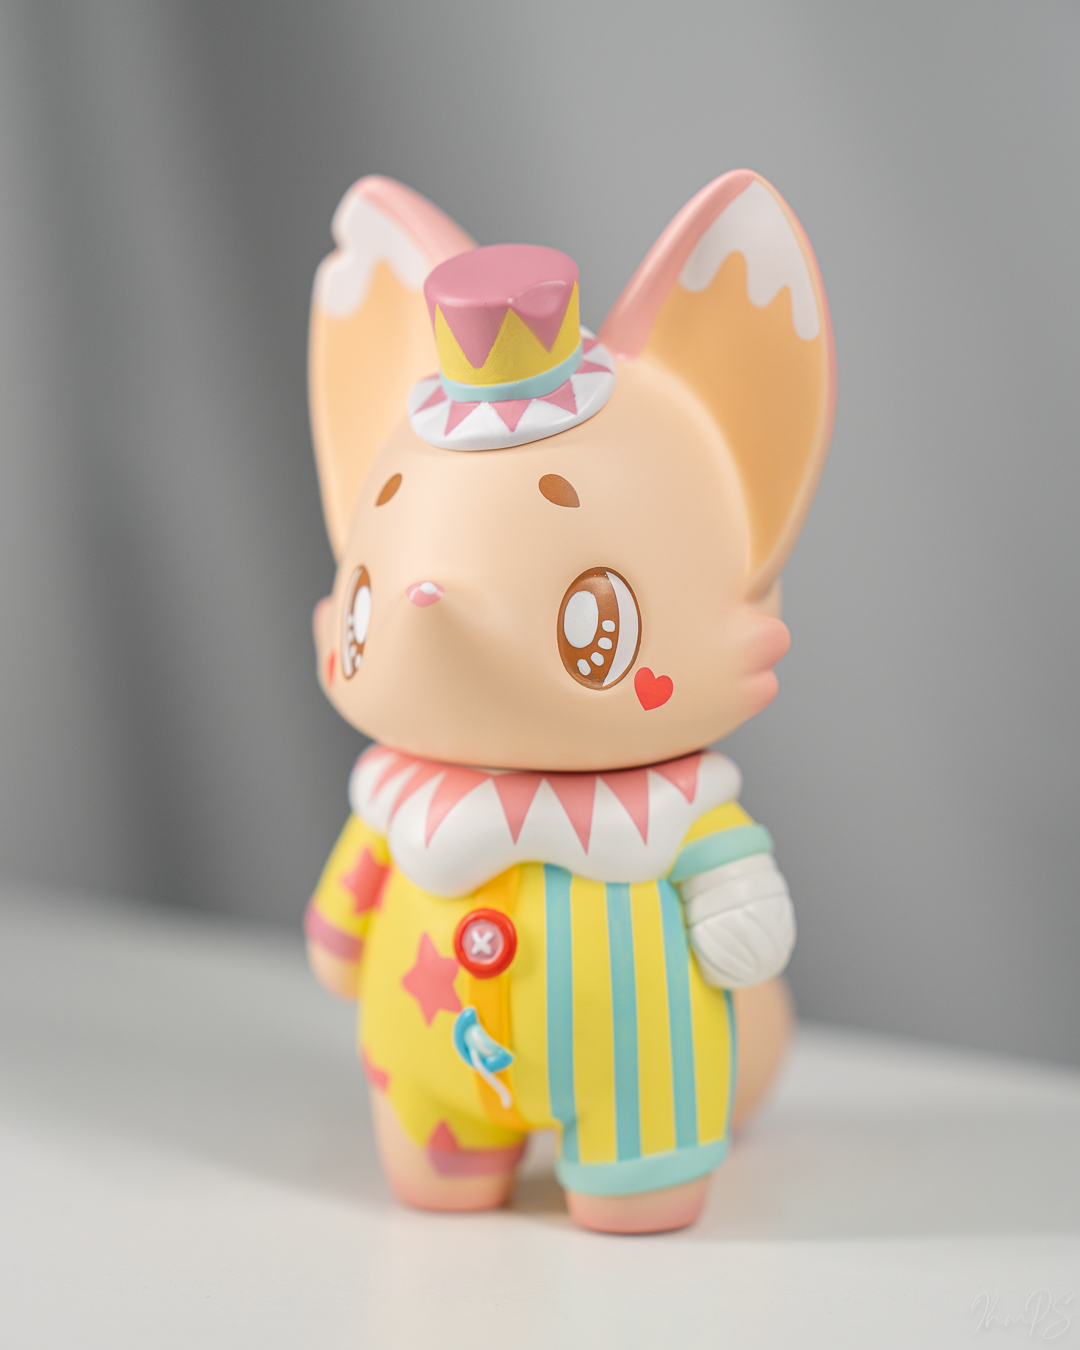 Fenni Clown Series: Just Wanted to See Your Smile by Poriin - Preorder